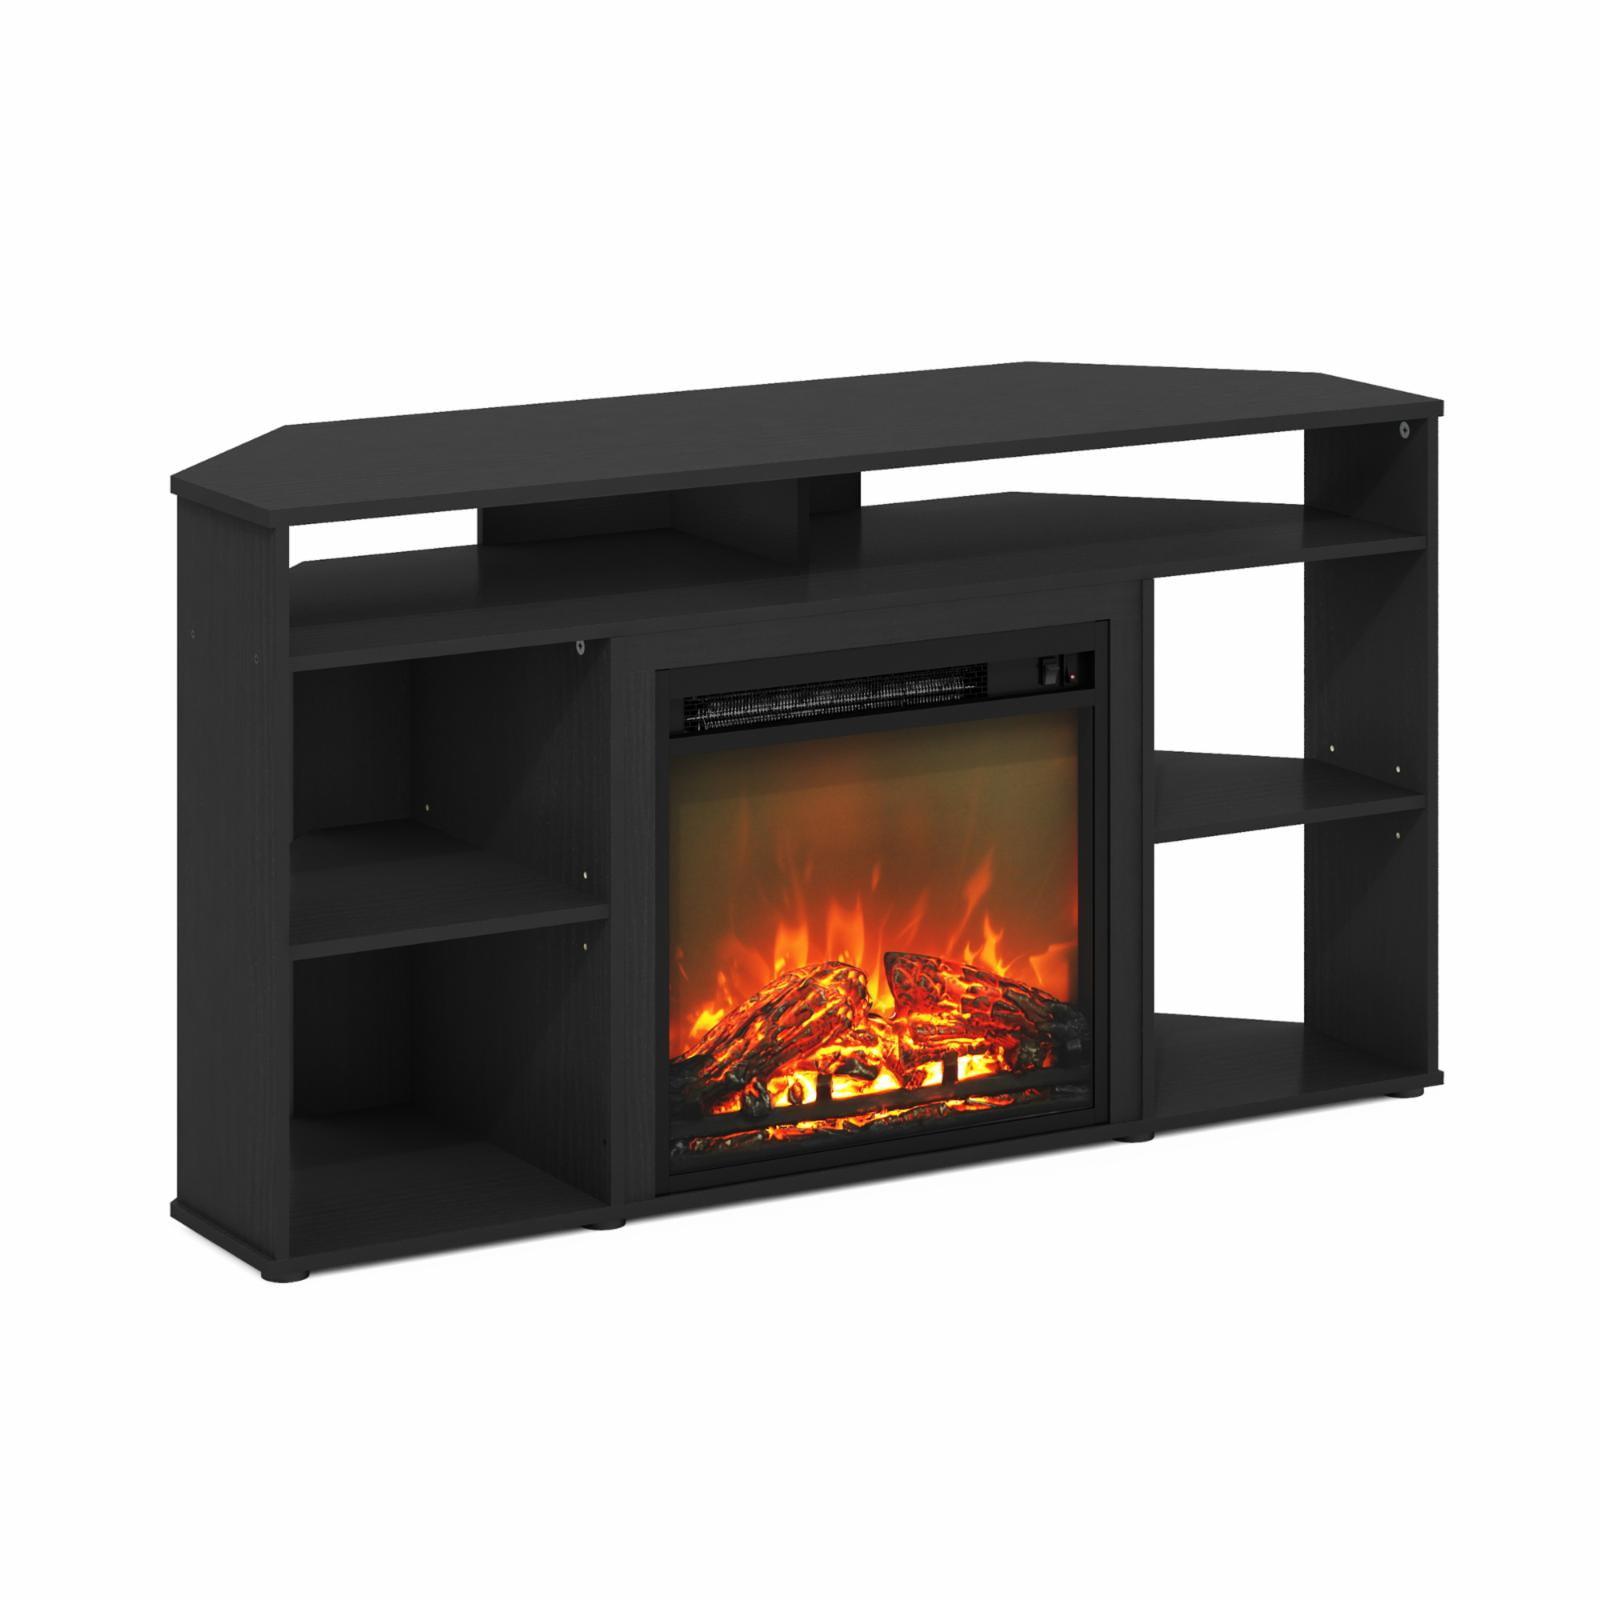 Americano Brown Corner TV Stand with Integrated Fireplace, 55"